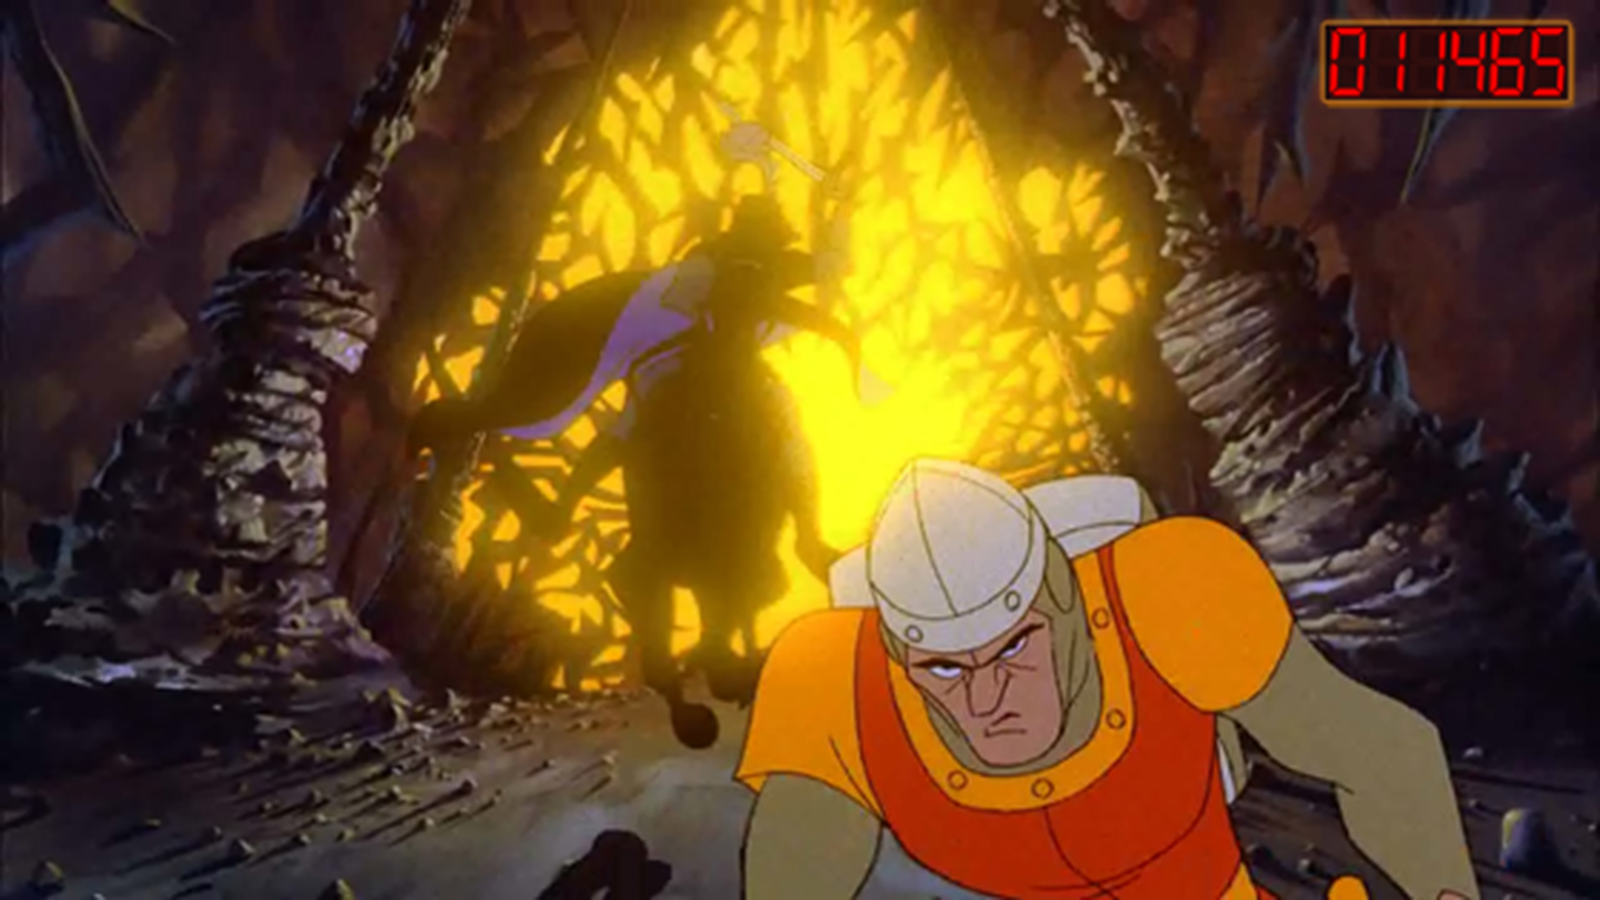 Classic Video Game Dragon S Lair Comes To Os X Macrumors